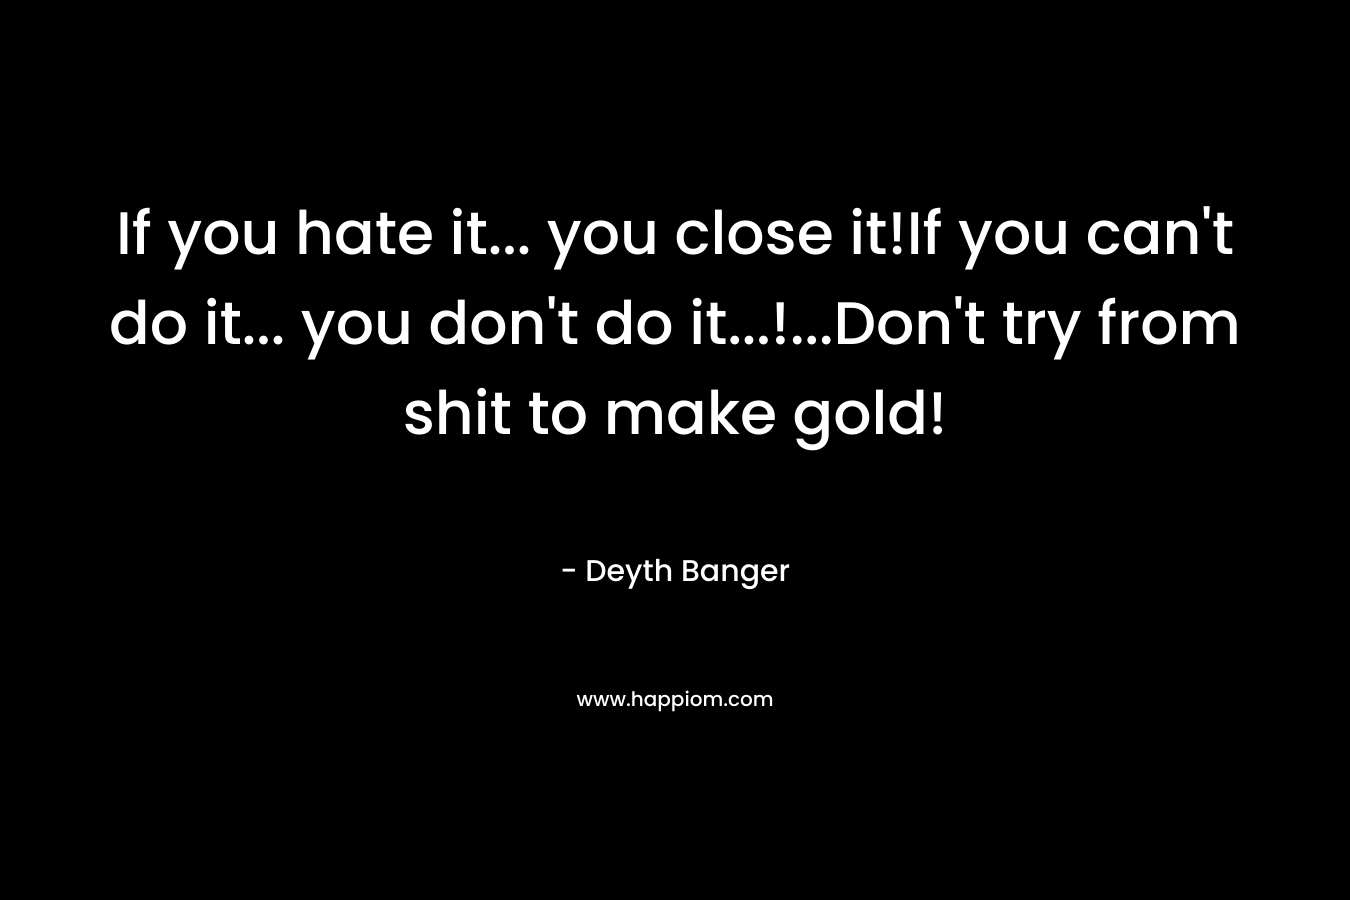 If you hate it... you close it!If you can't do it... you don't do it...!...Don't try from shit to make gold!